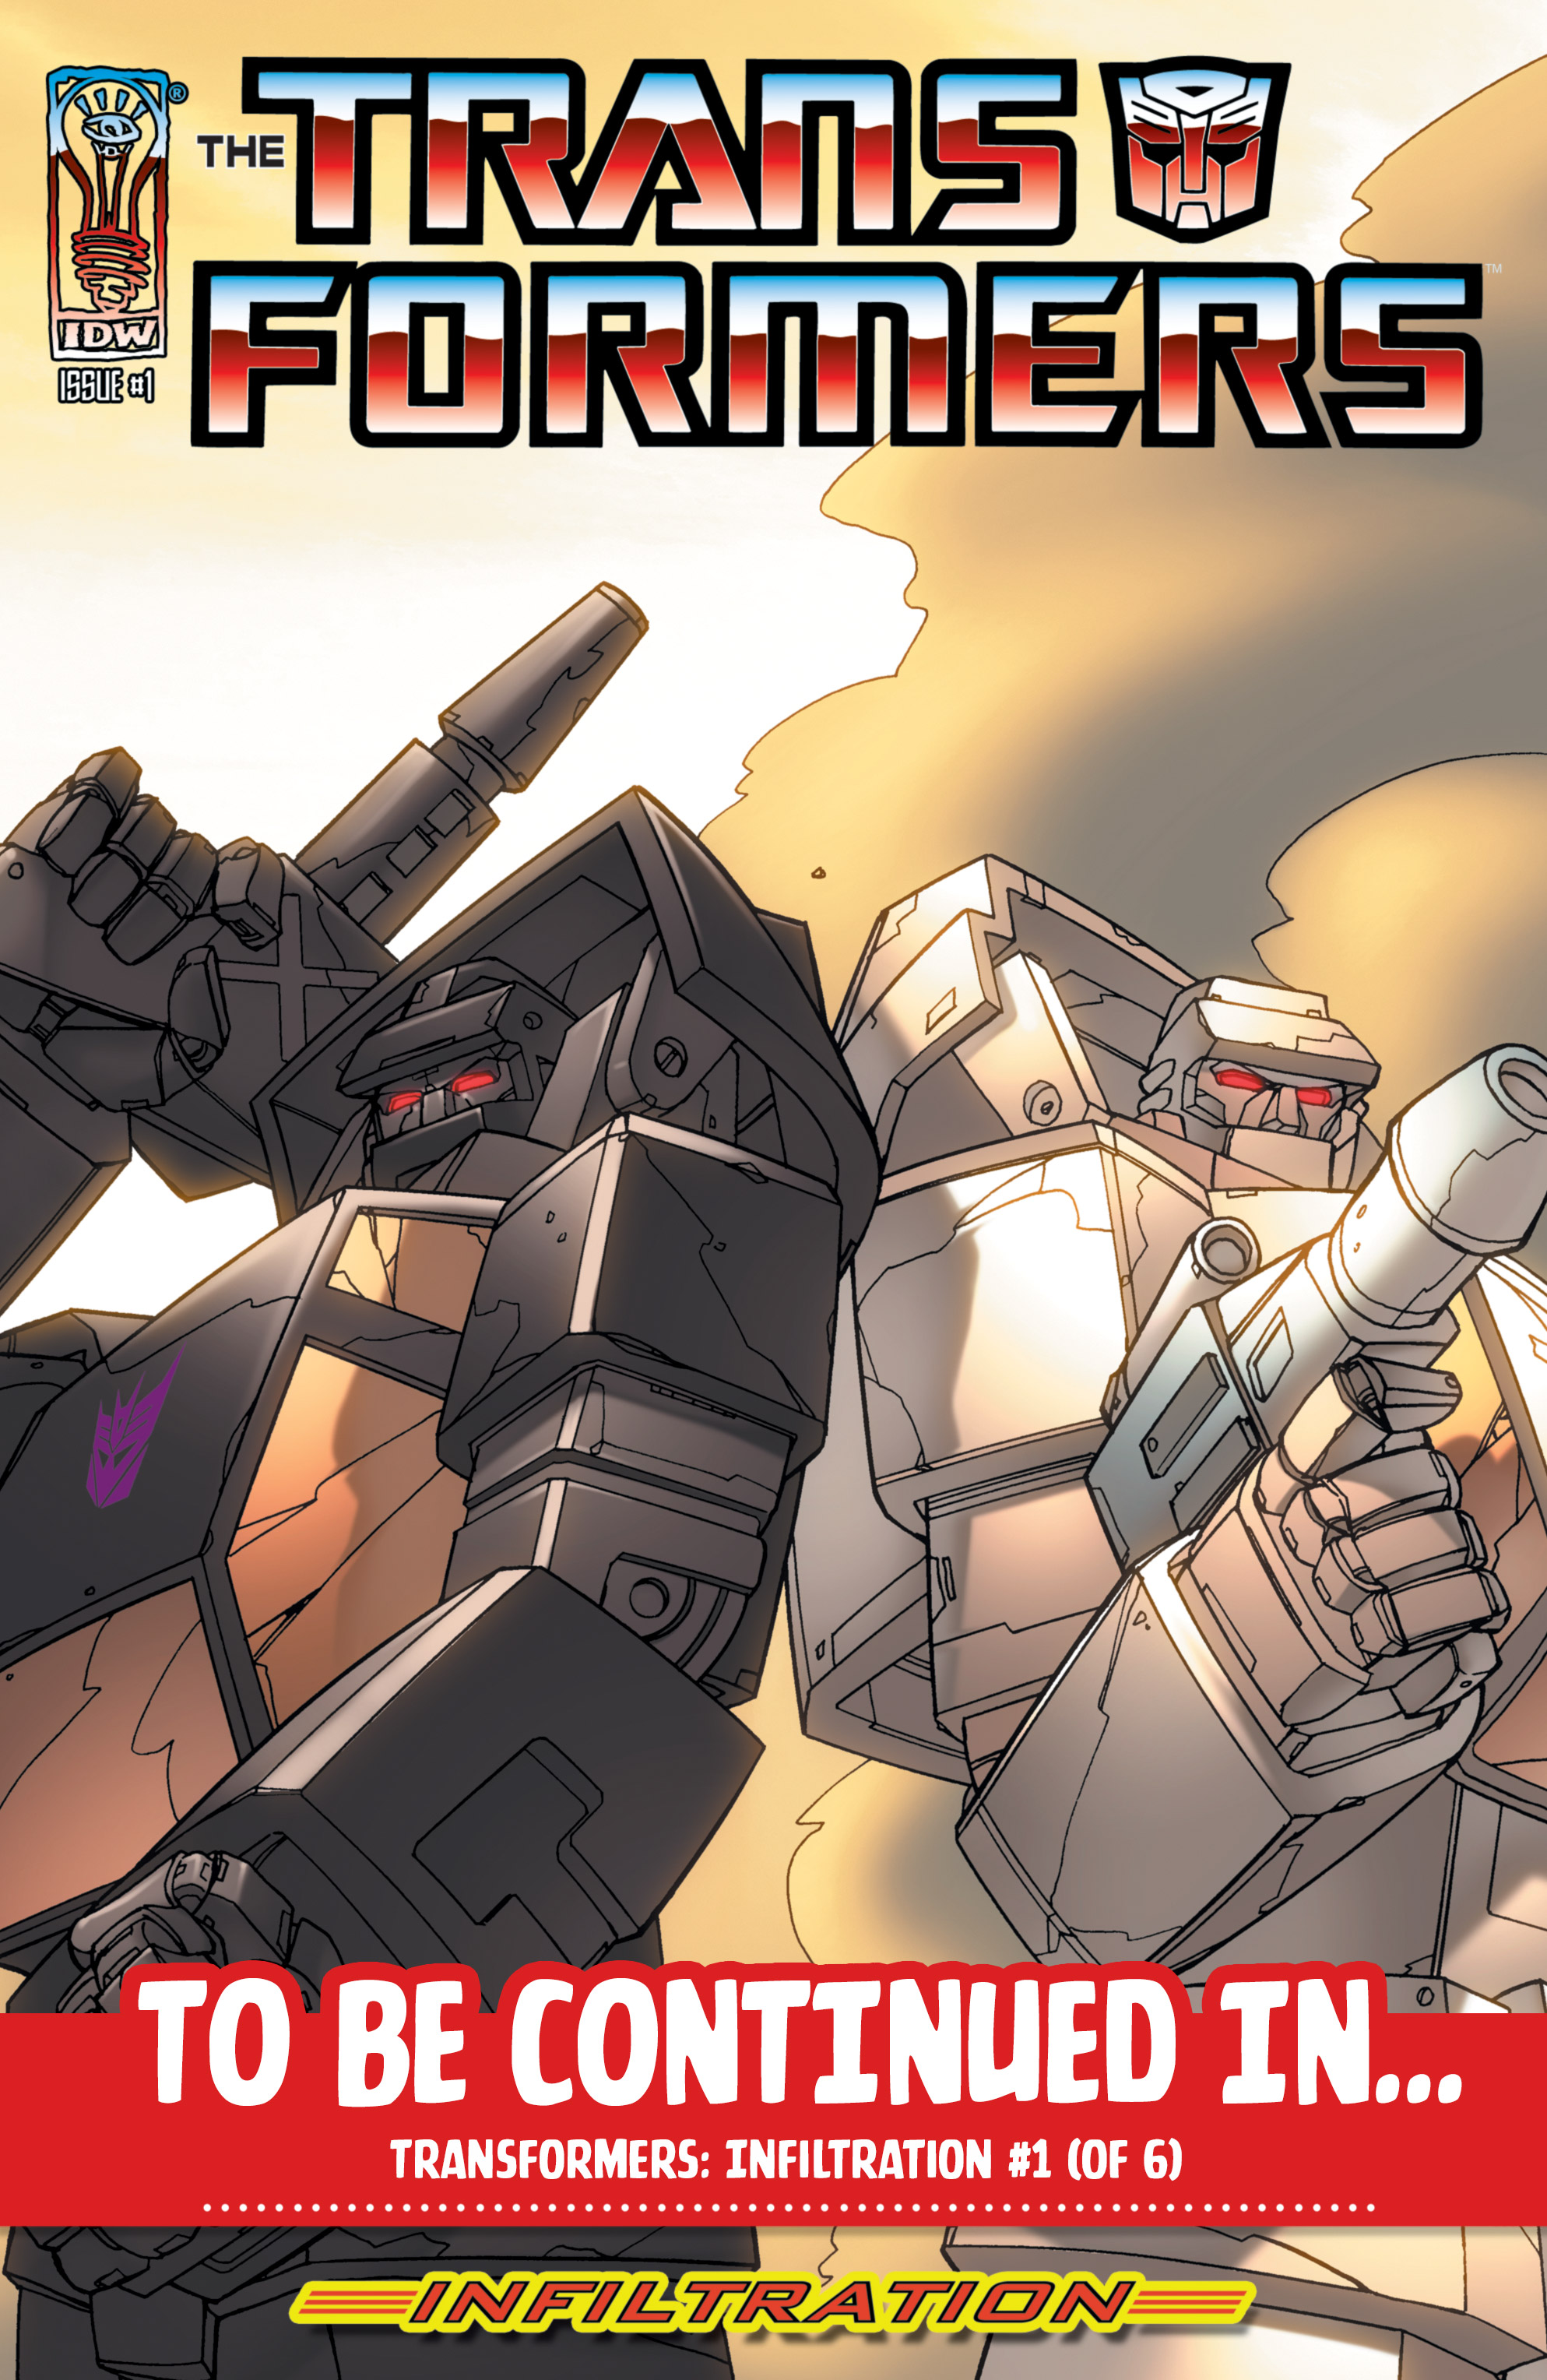 Read online The Transformers: Lost Light comic -  Issue #19 - 30